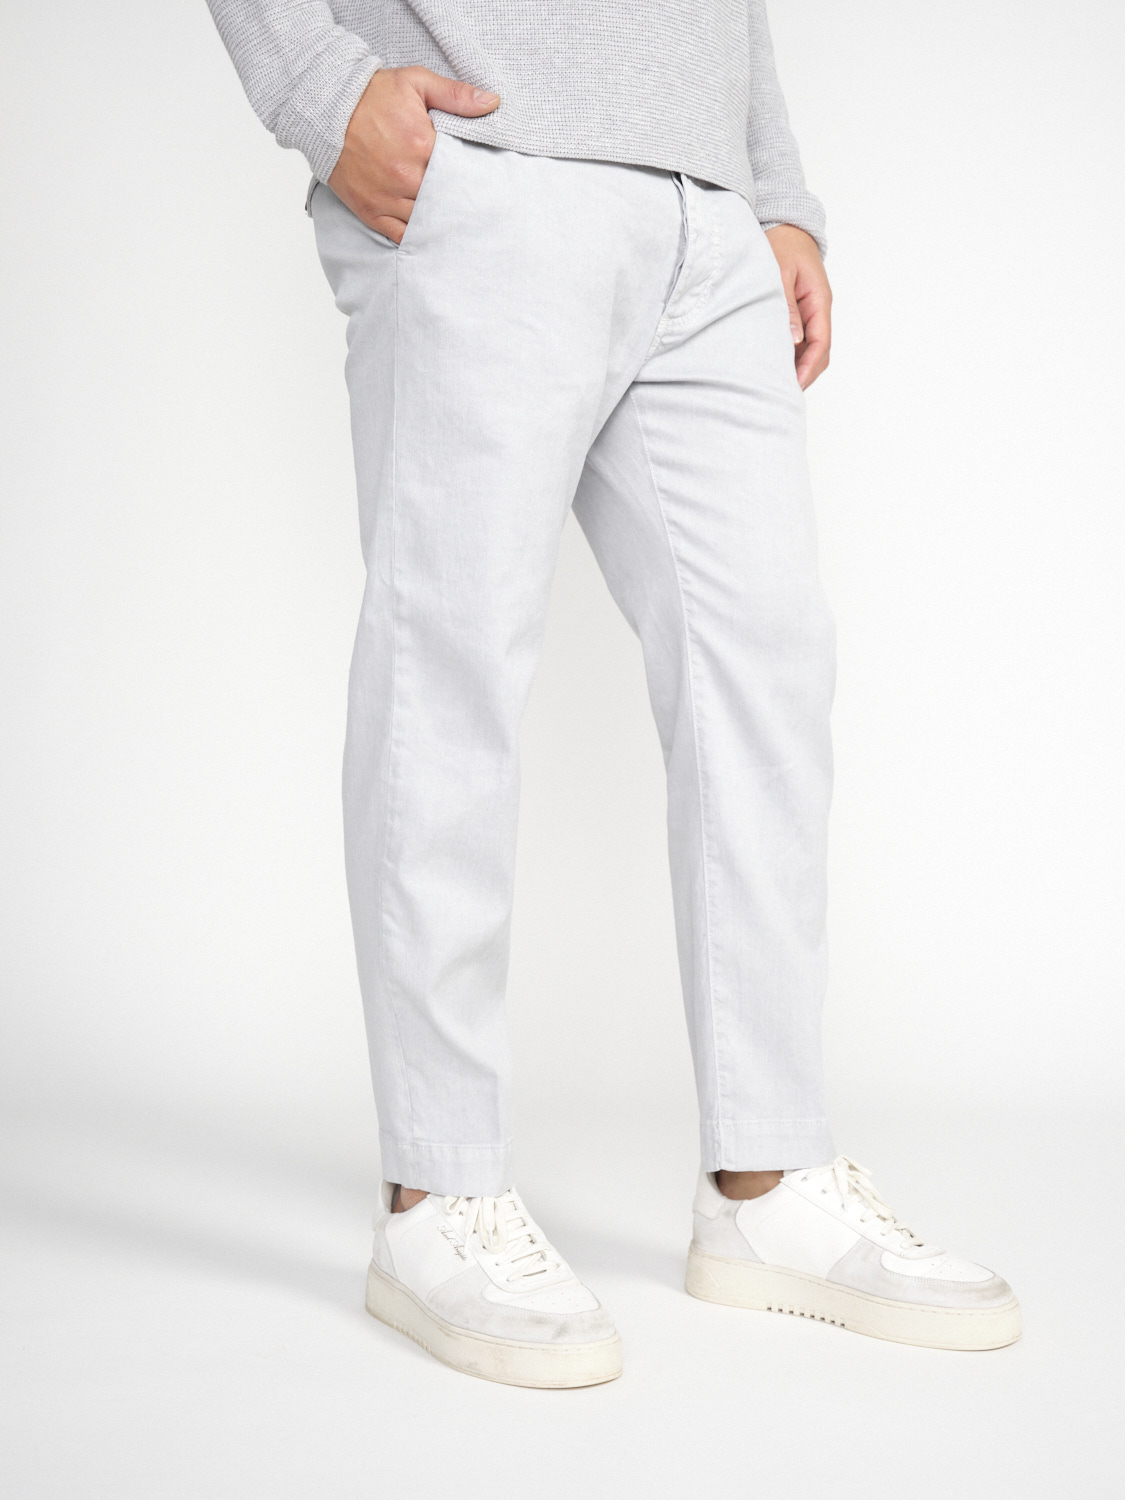 nine in the morning Tim – Stretchy linen-cotton mix jeans  hellgrau 32